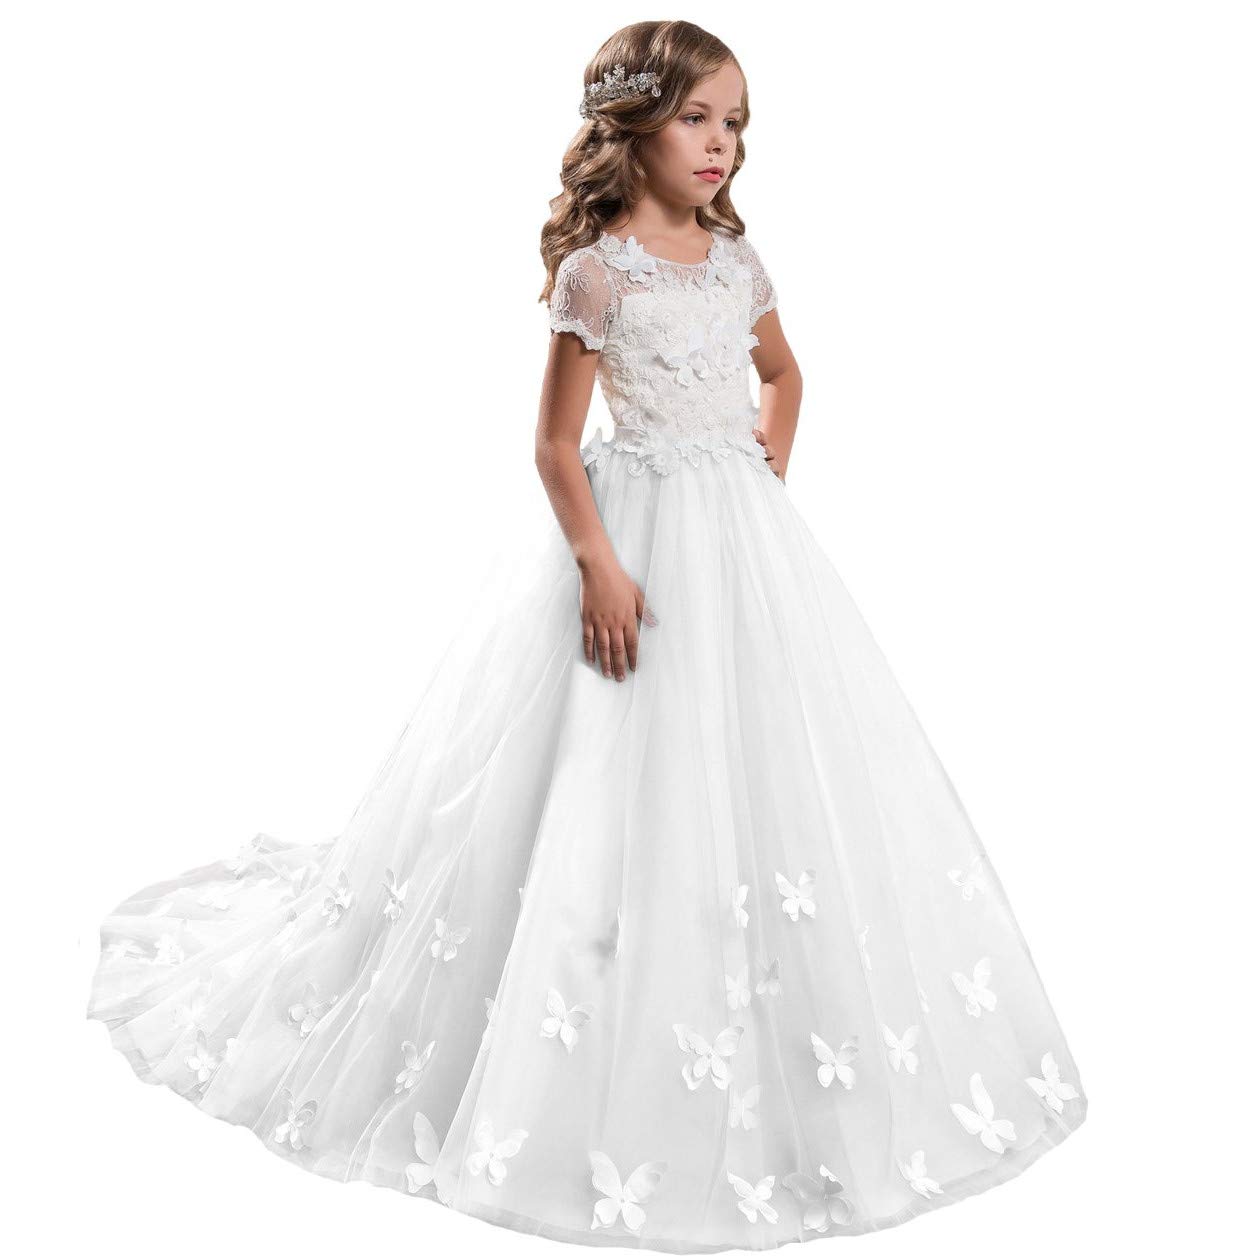 Butterfly  Flower Girl Dress Fancy Tulle Lace Short Sleeved Pageant Dress princess dress Ball Gown Princess Girl Birthday Dresses